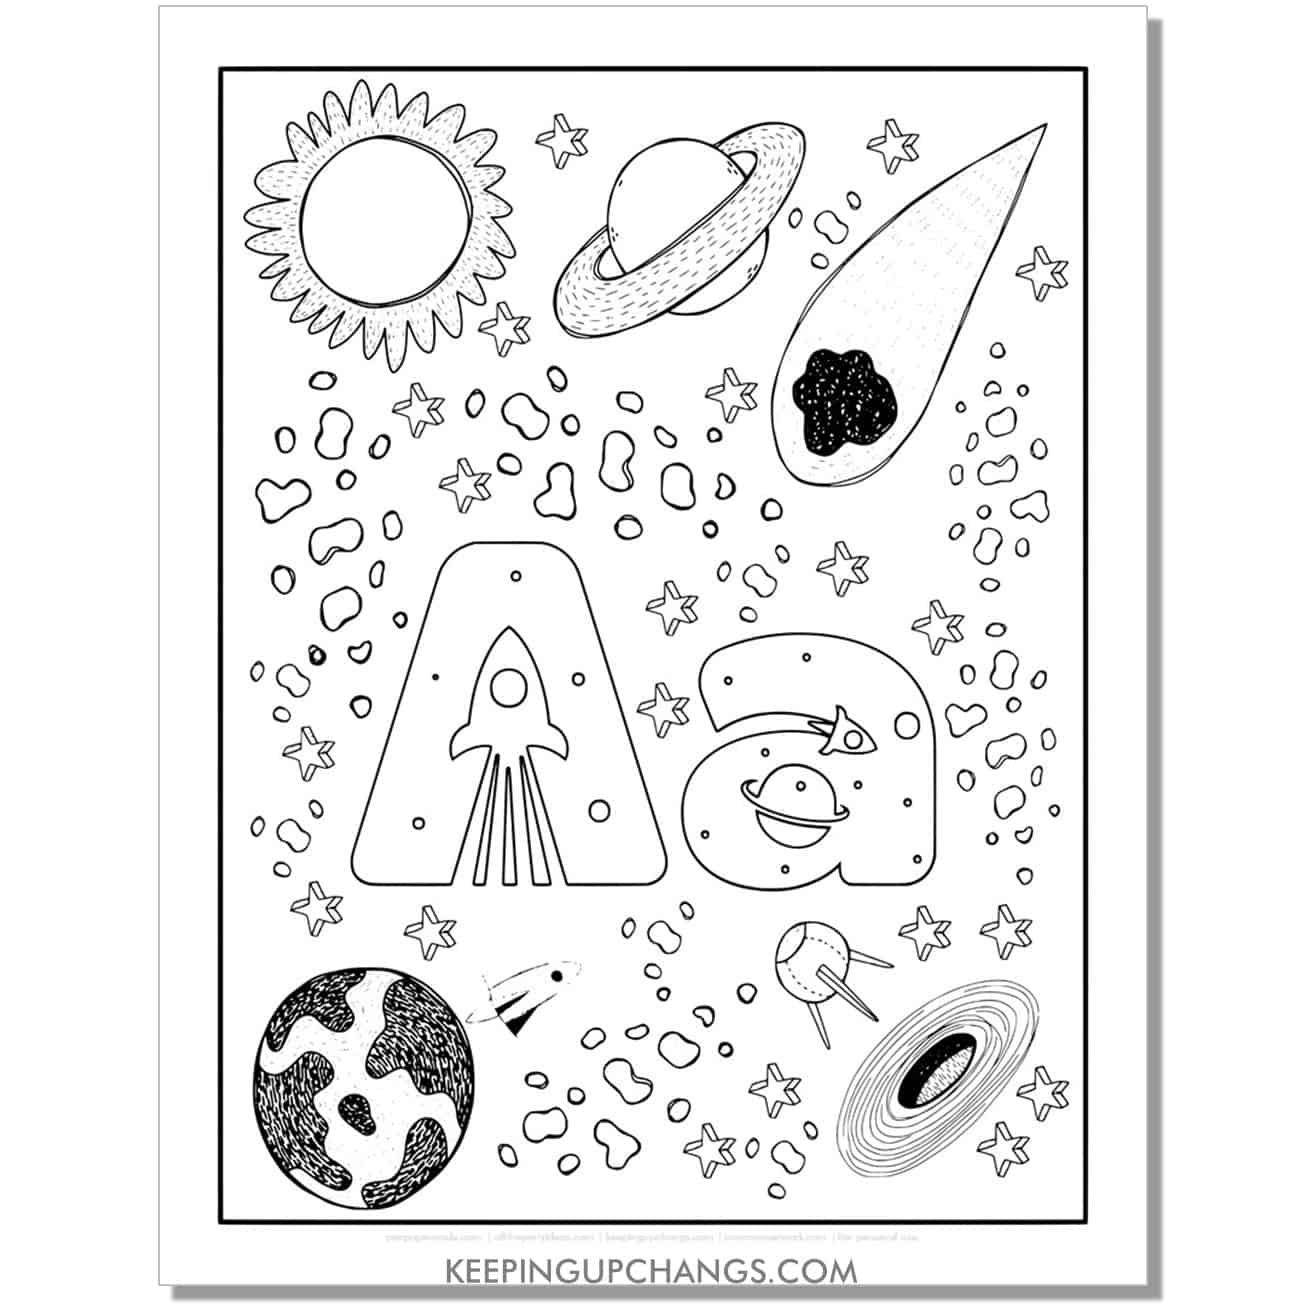 free alphabet letter a coloring page for kids with rockets, space theme.